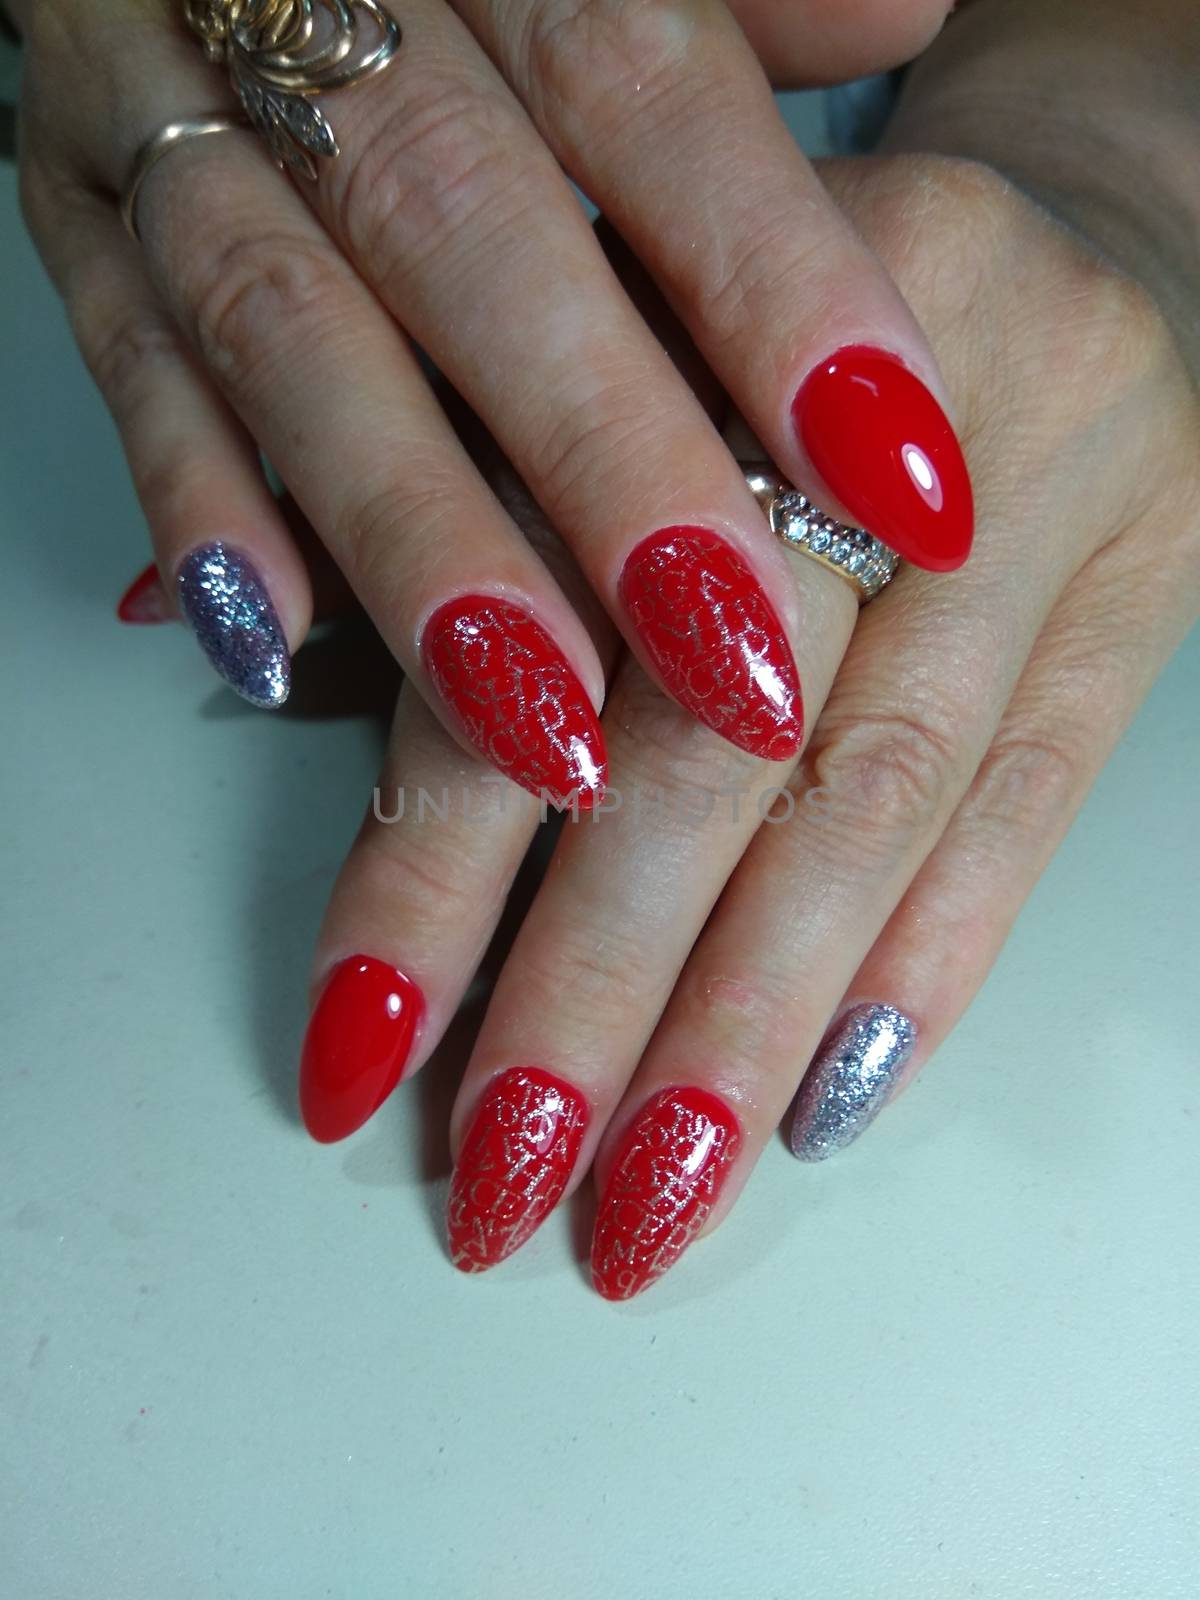 Here is presented one of the best manicure designs this year's Nail in red